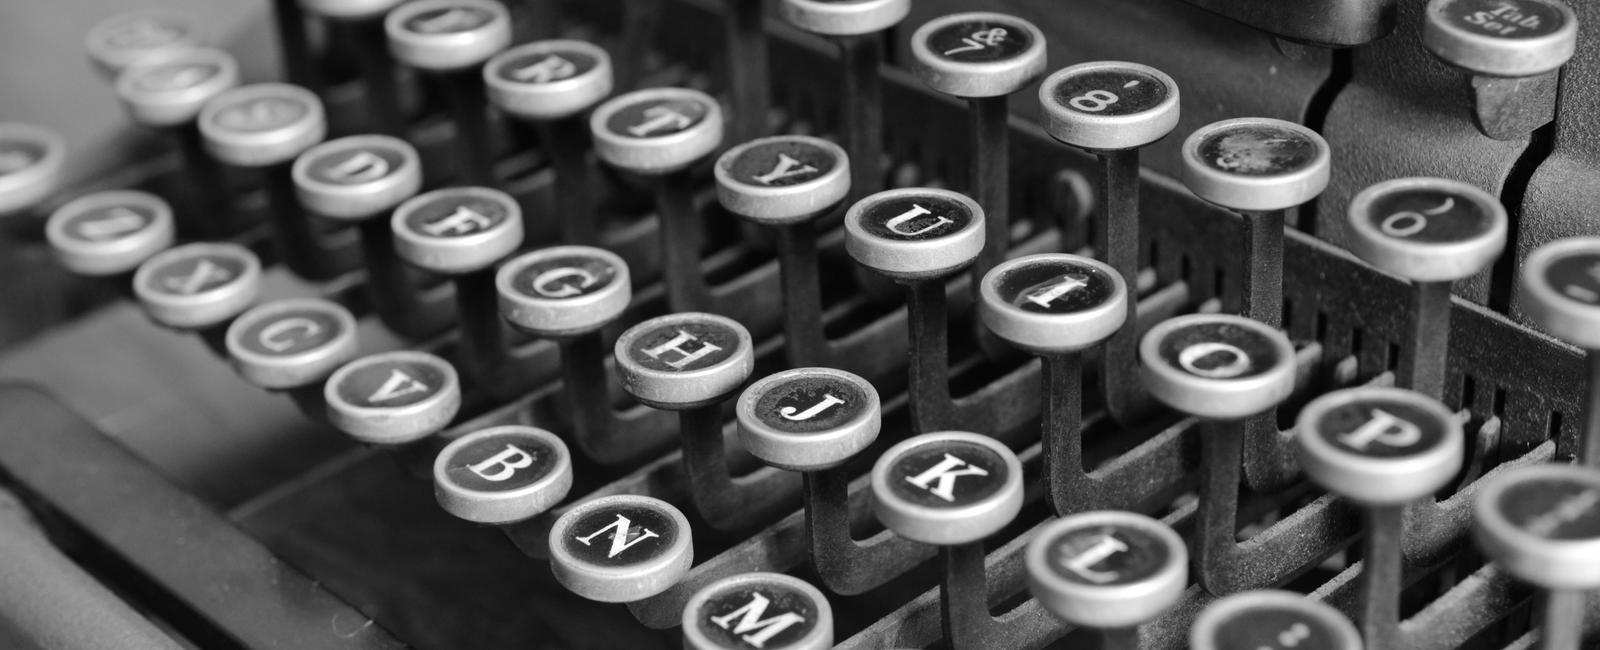 typewriter is the longest word that can be made using the keys on only one row of the keyboard